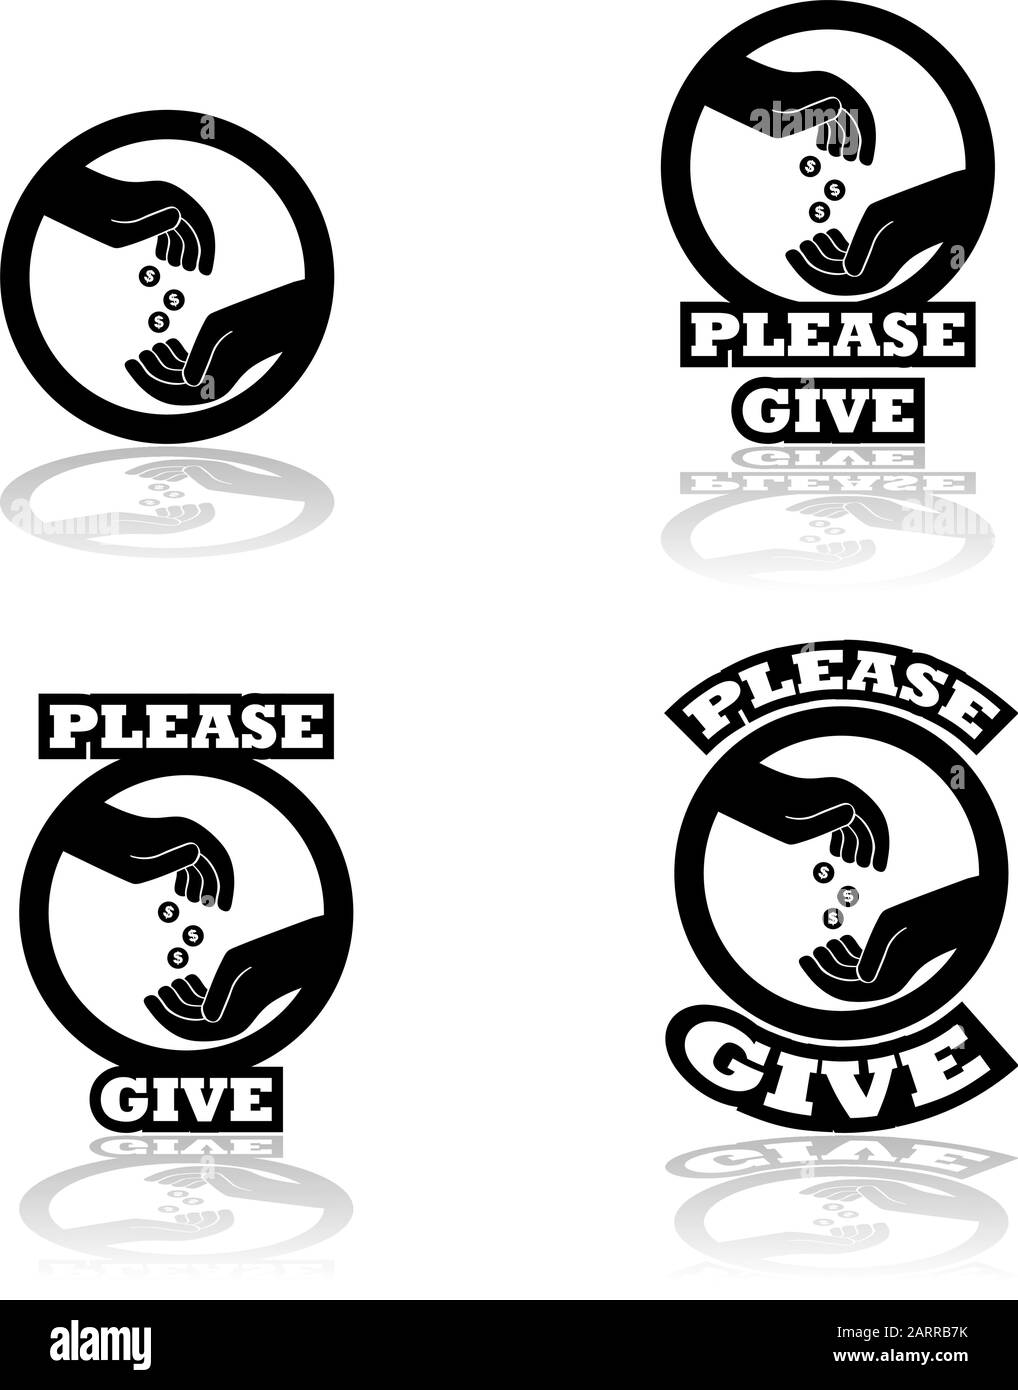 Icon set showing a hand dropping some coins on an open hand, indication donations Stock Vector